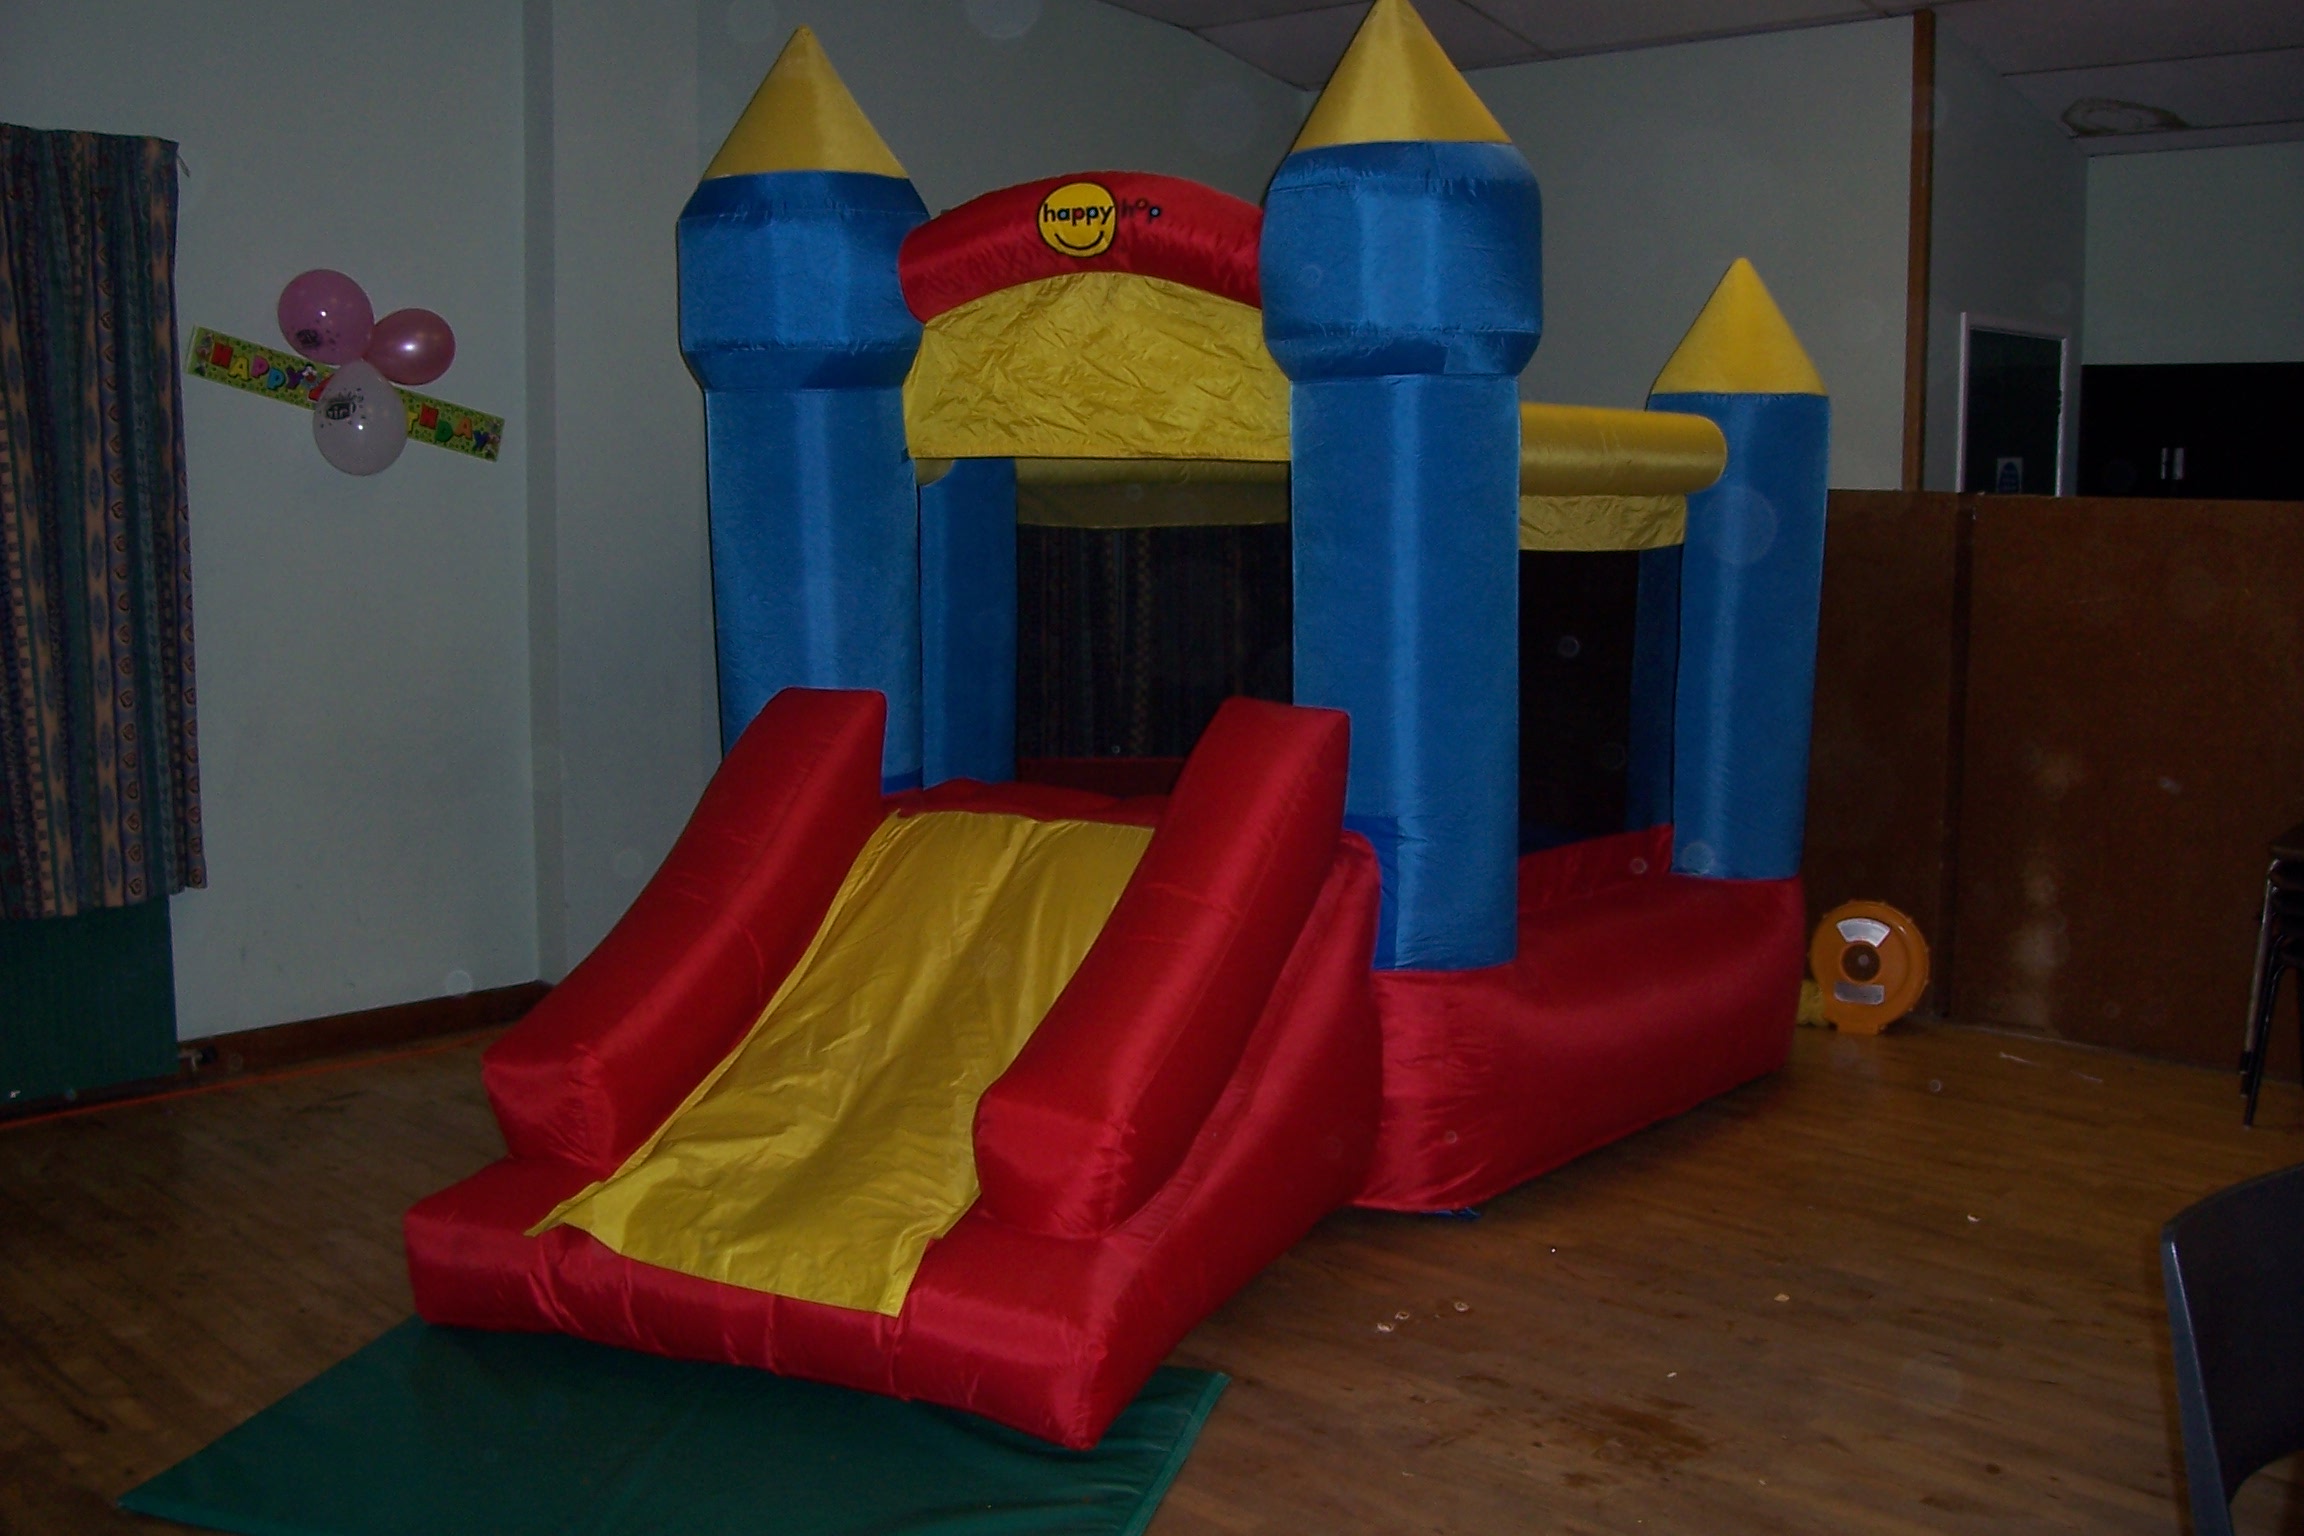 This bouncy castle is perfect for the little ones. As it's fairly low and compact, it fits well into smaller halls and gardens. Crash mats are provided for a safe landing when using the slide, and is suitable for children up to 5 years.